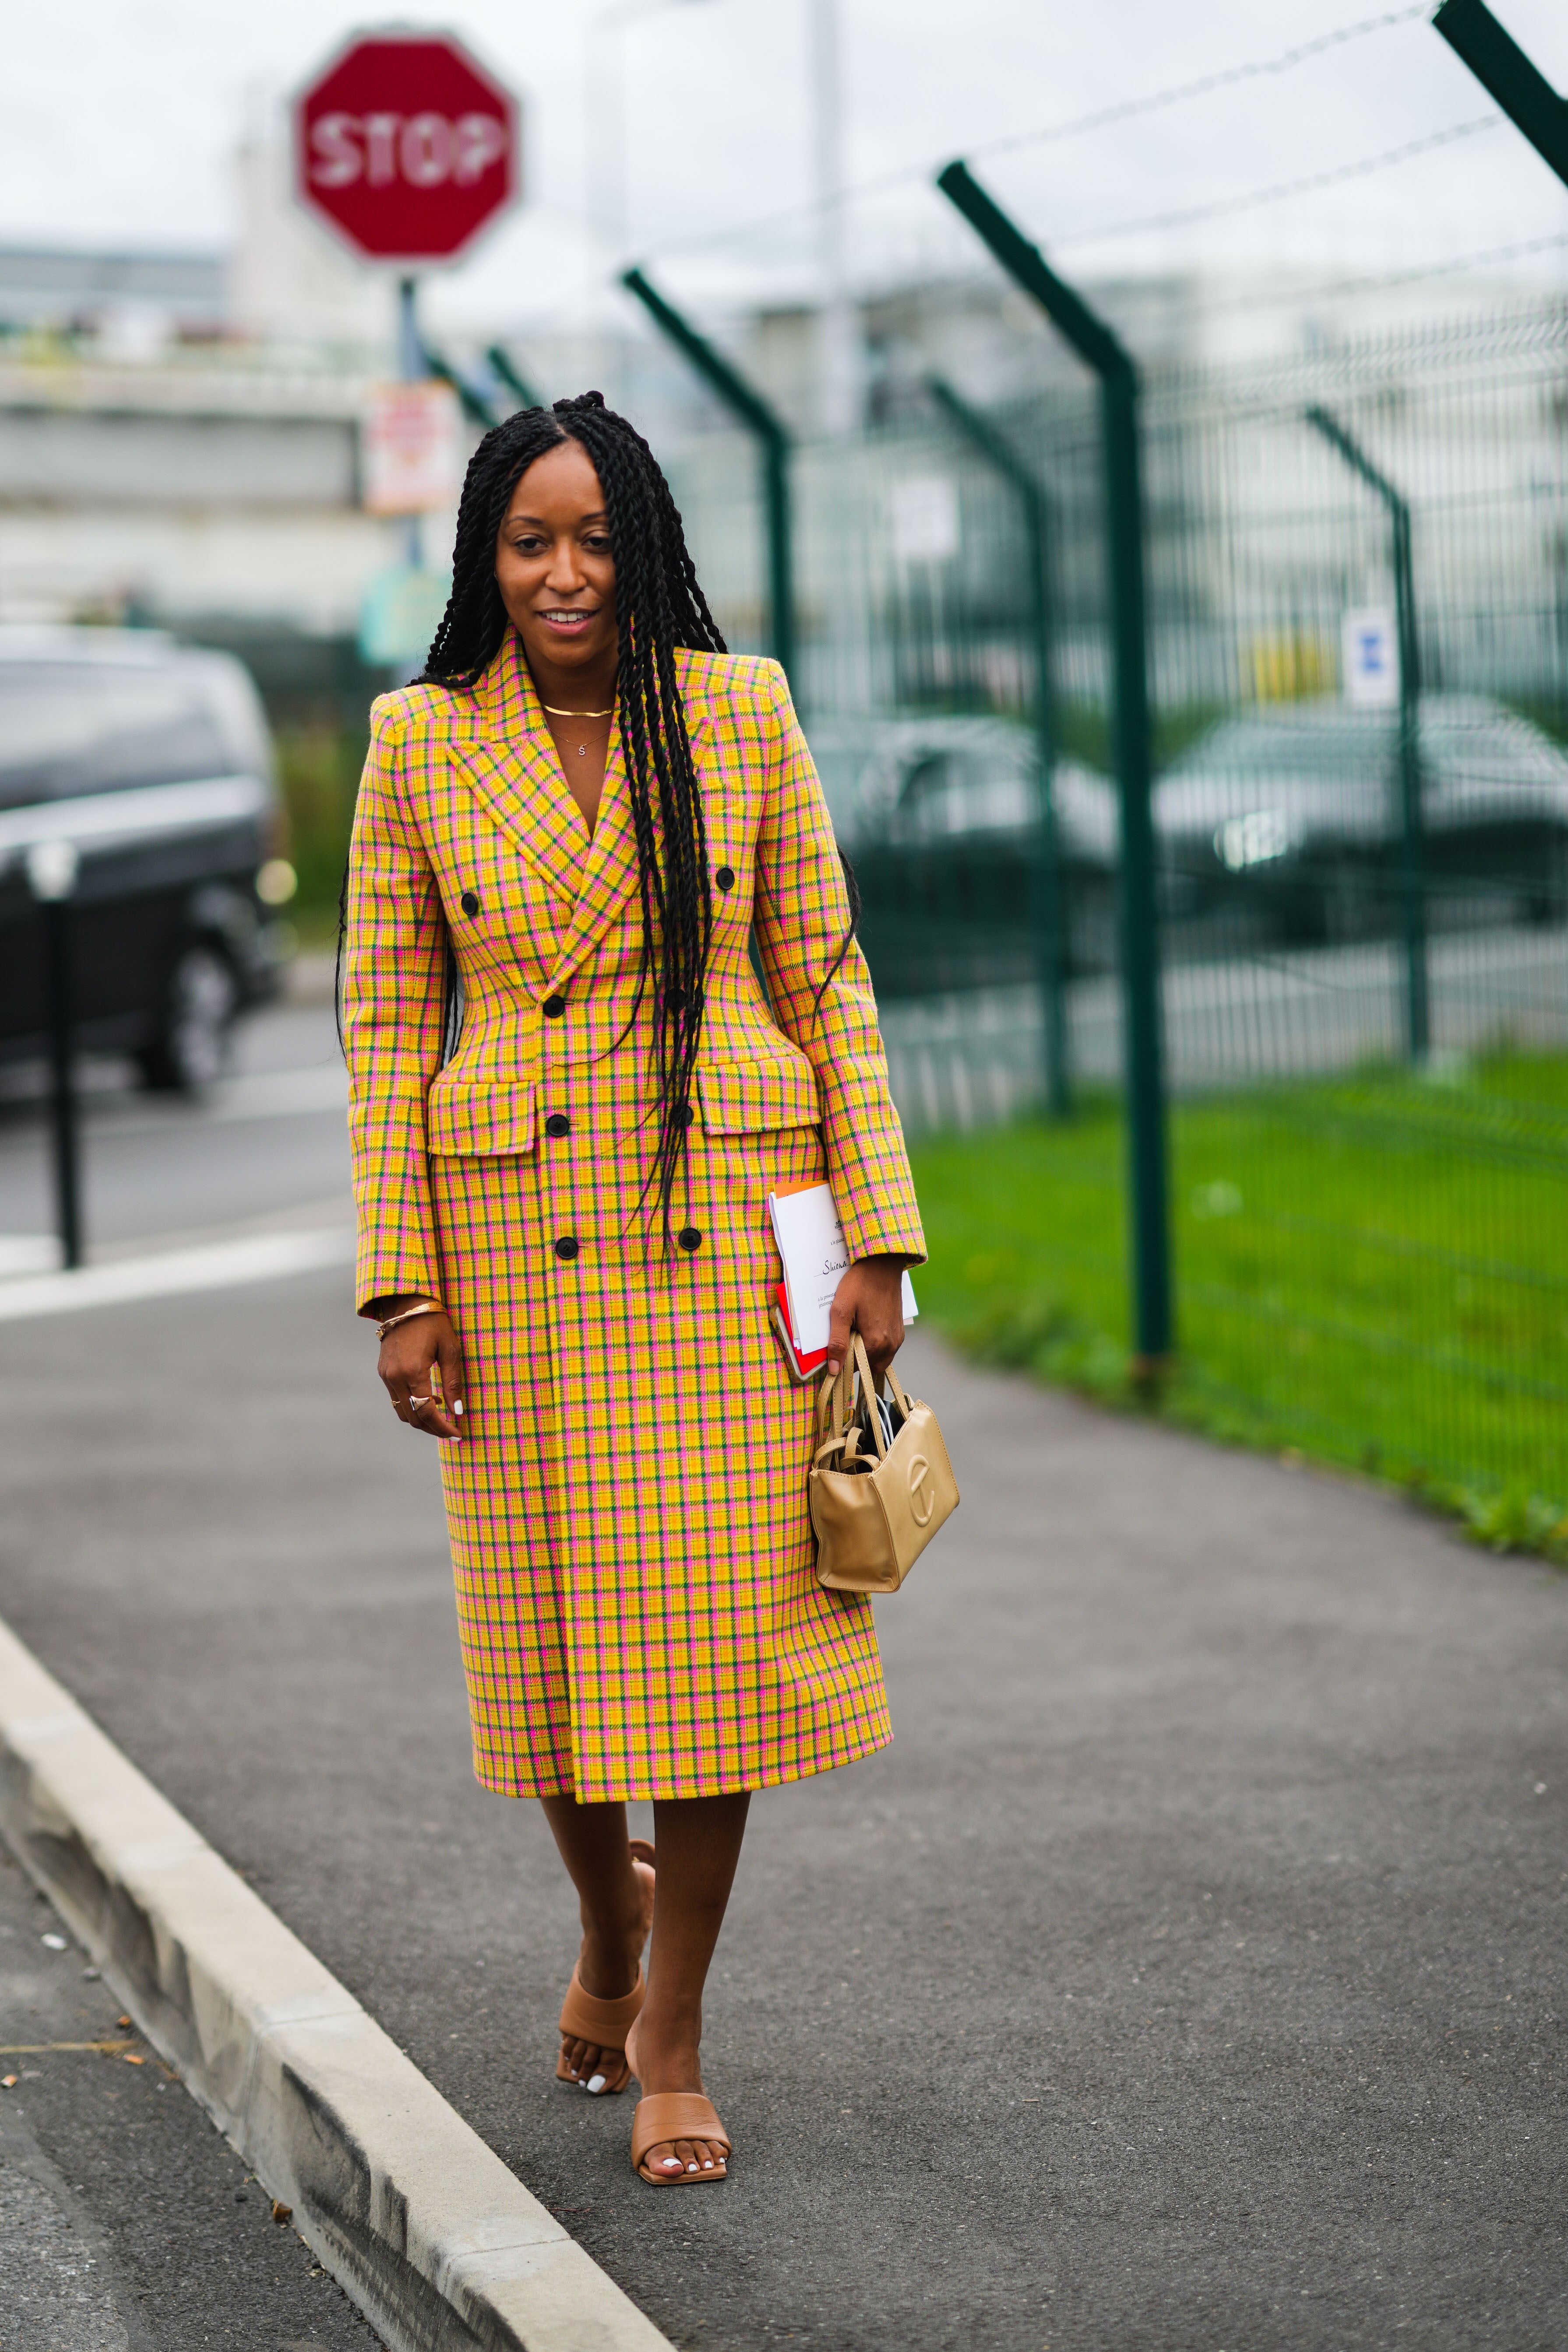 How to wear a midi dress in winter (without freezing) – Sophar So Good